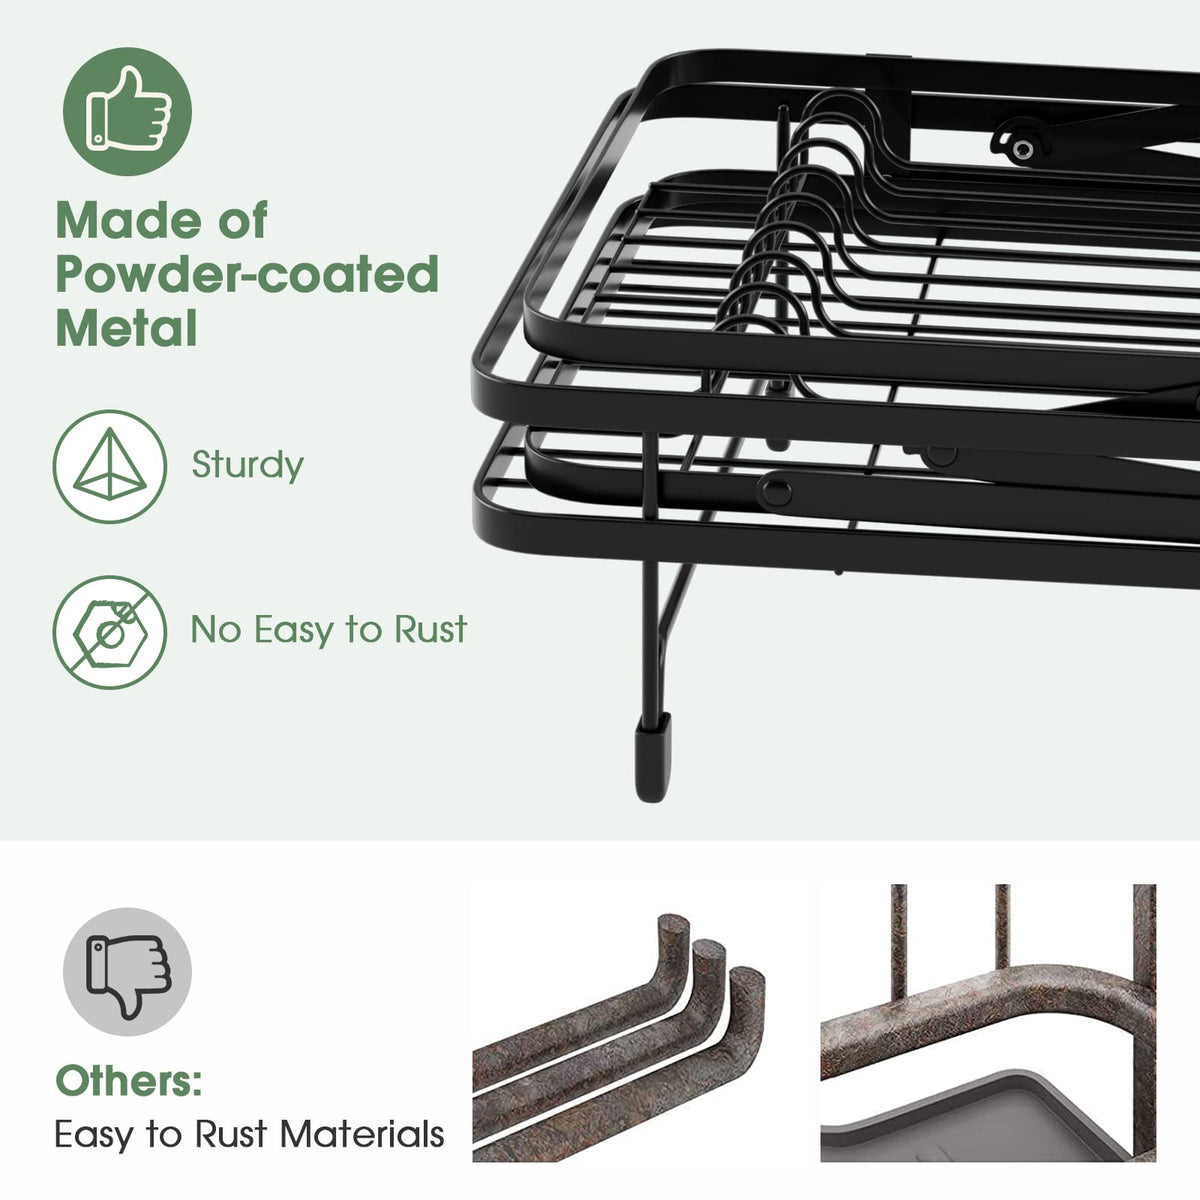 Giantex Dish Drying Rack, Collapsible 2-Tier Dish Rack and Drainboard Set with Removable Drip Tray